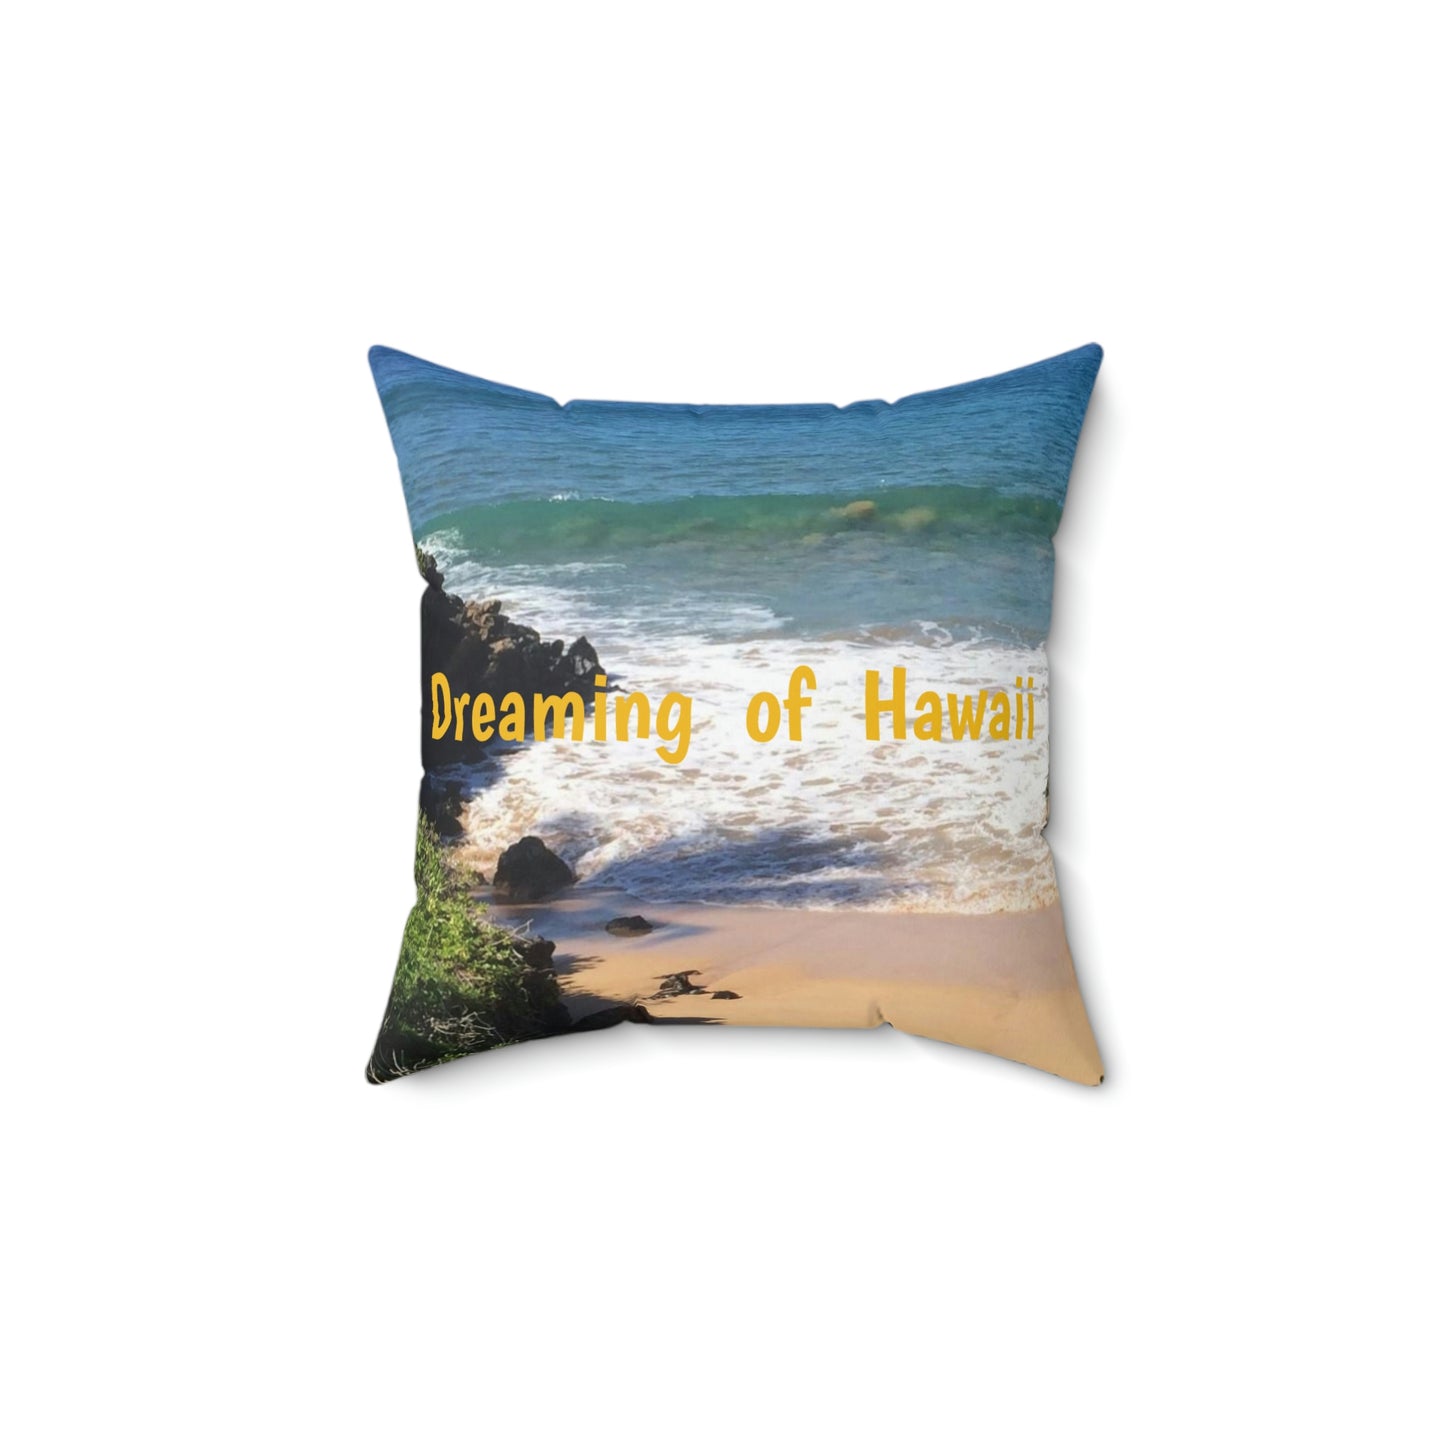 Dreaming of Hawaii Spun Polyester Square Pillow